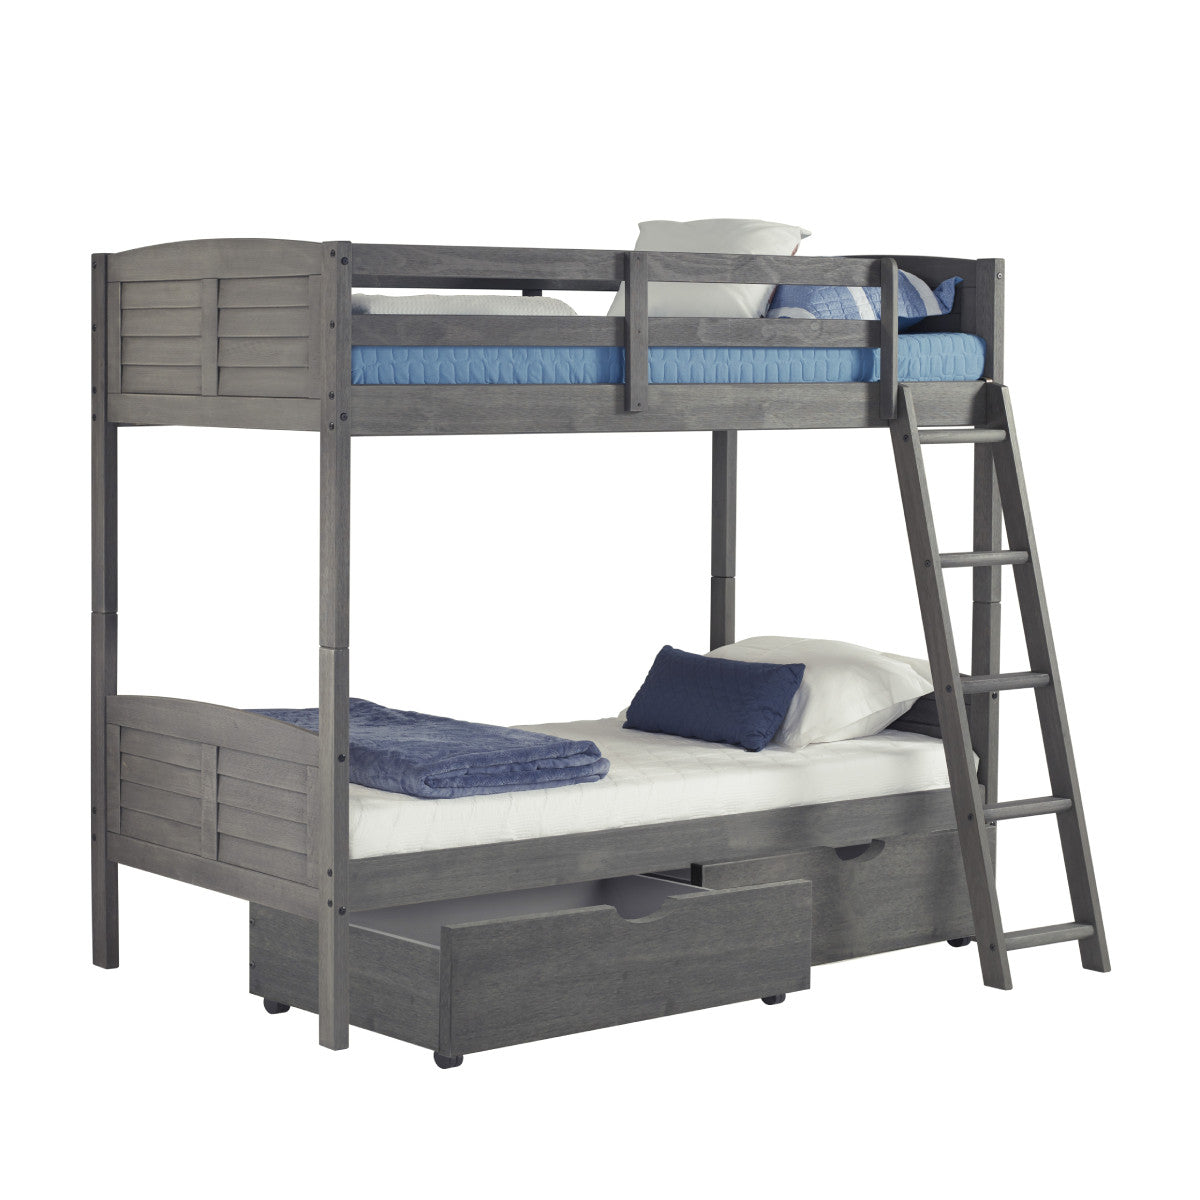 TWIN/TWIN LOUVER BUNK BED WITH DUAL UNDER BED DRAWERS IN ANTIQUE GREY FINISH